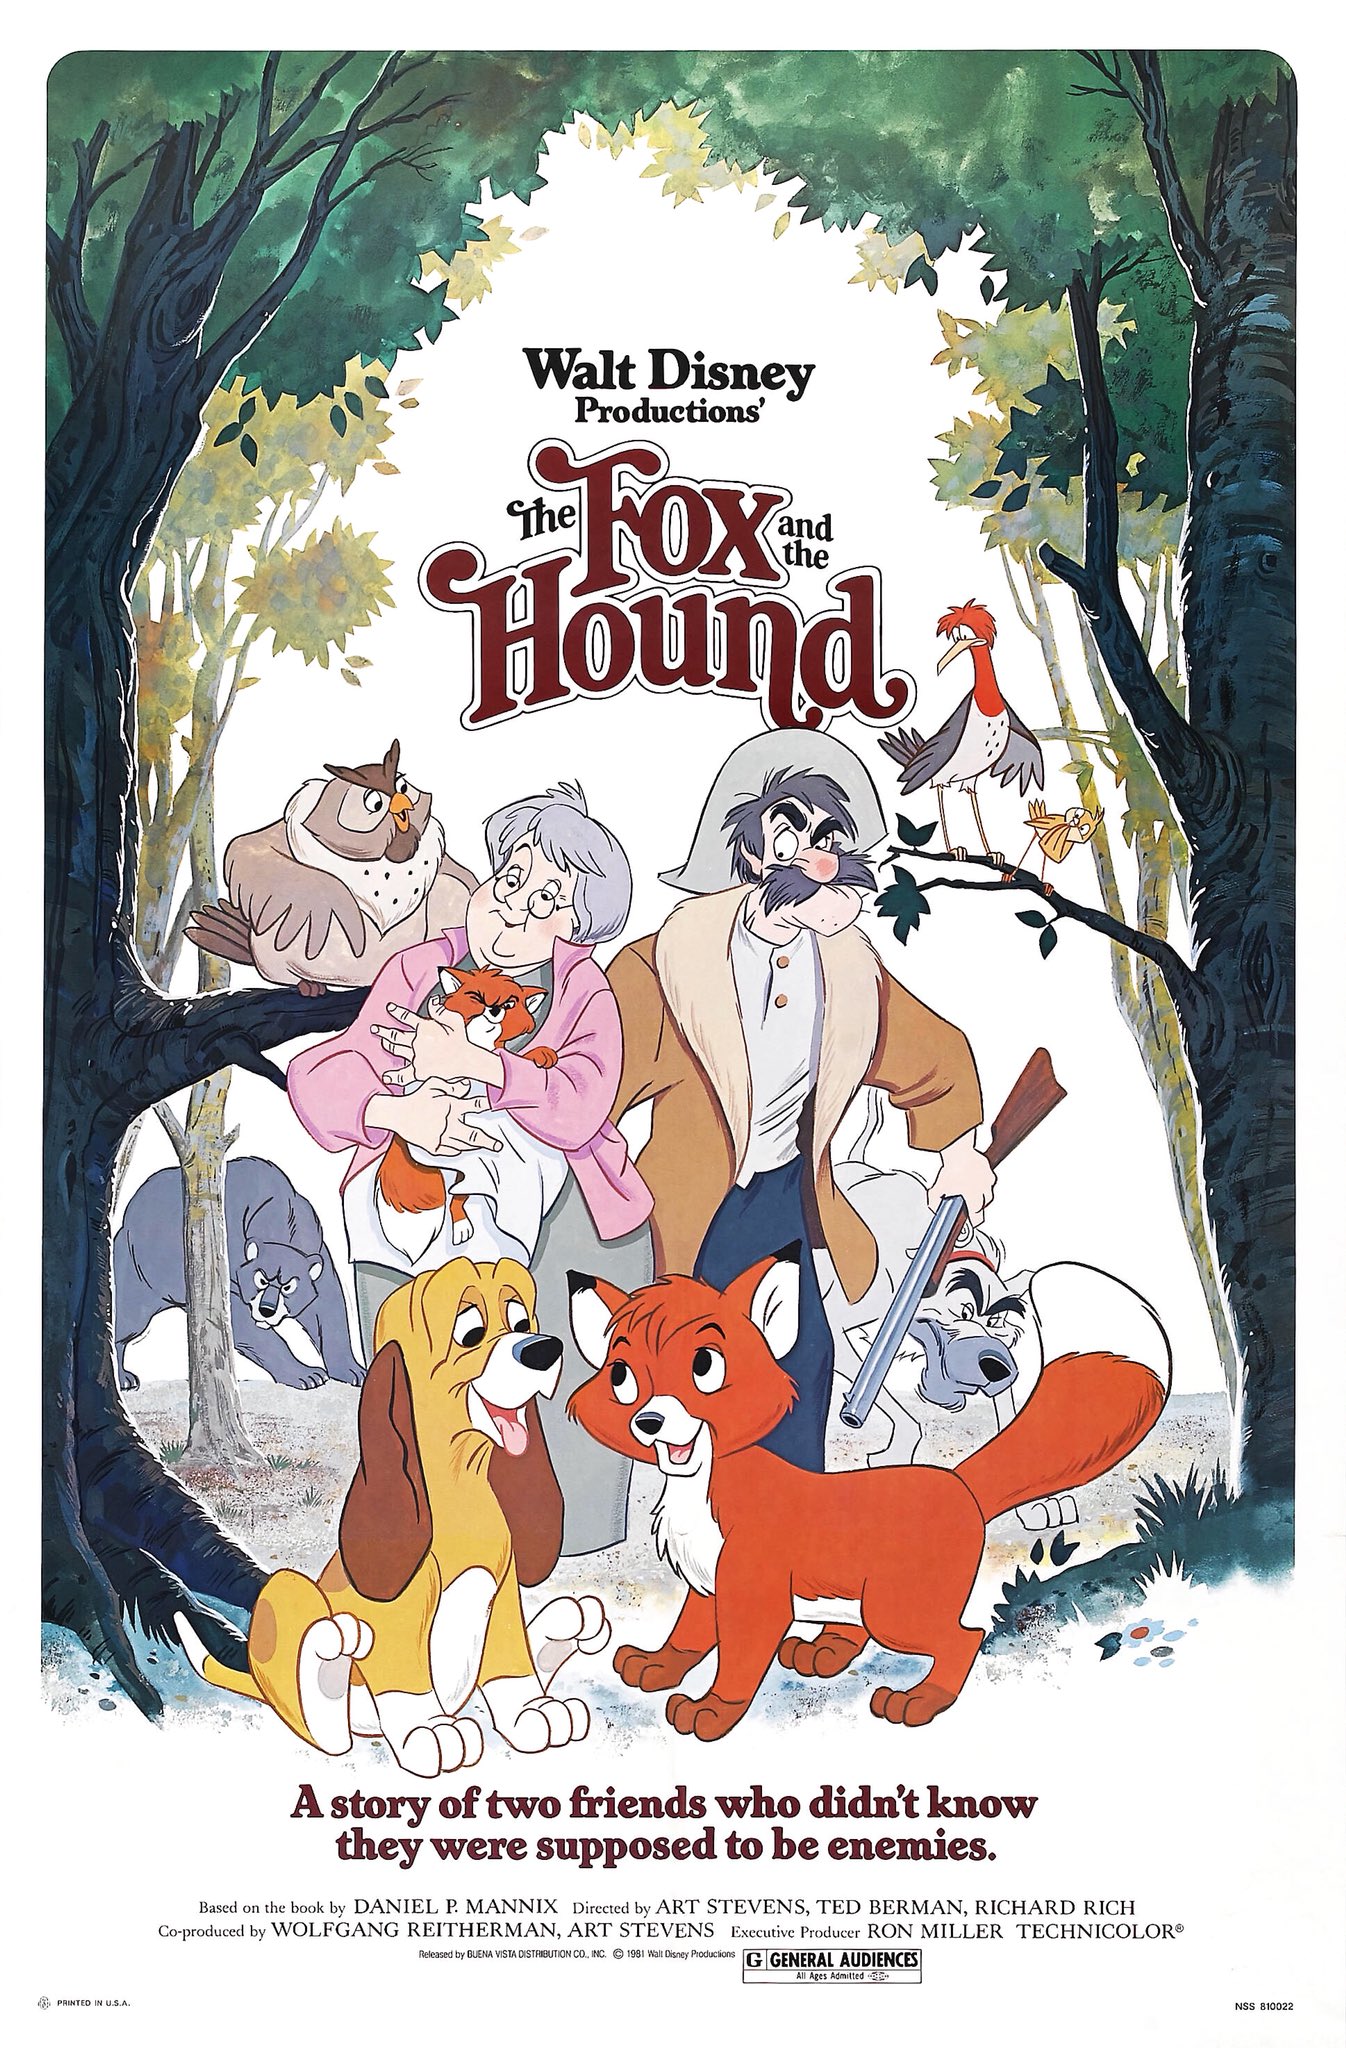 The Fox the | Hound Pictures Princess Fandom and | Wiki